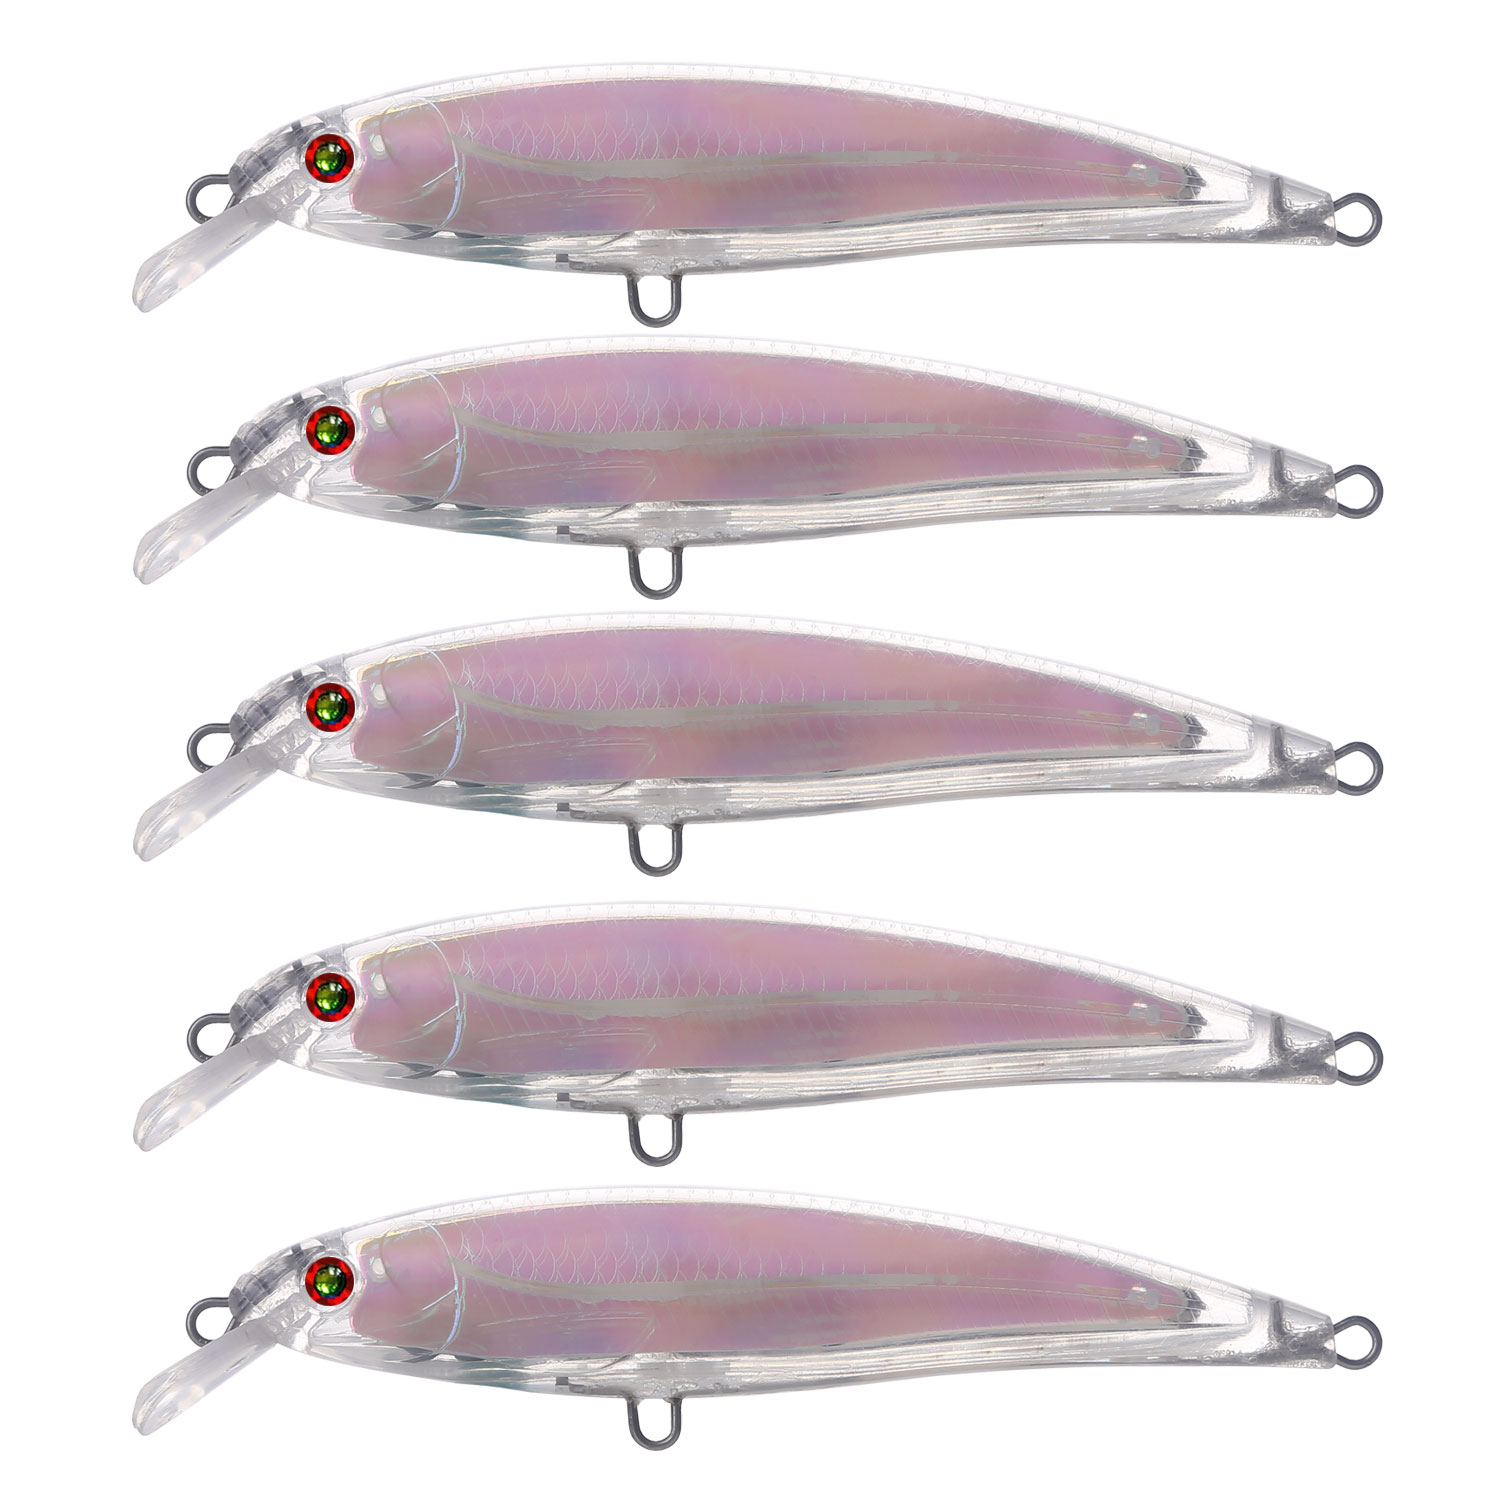 Wholesale Blank Lures Fishing Unpainted Lures DIY Clear Baits Body